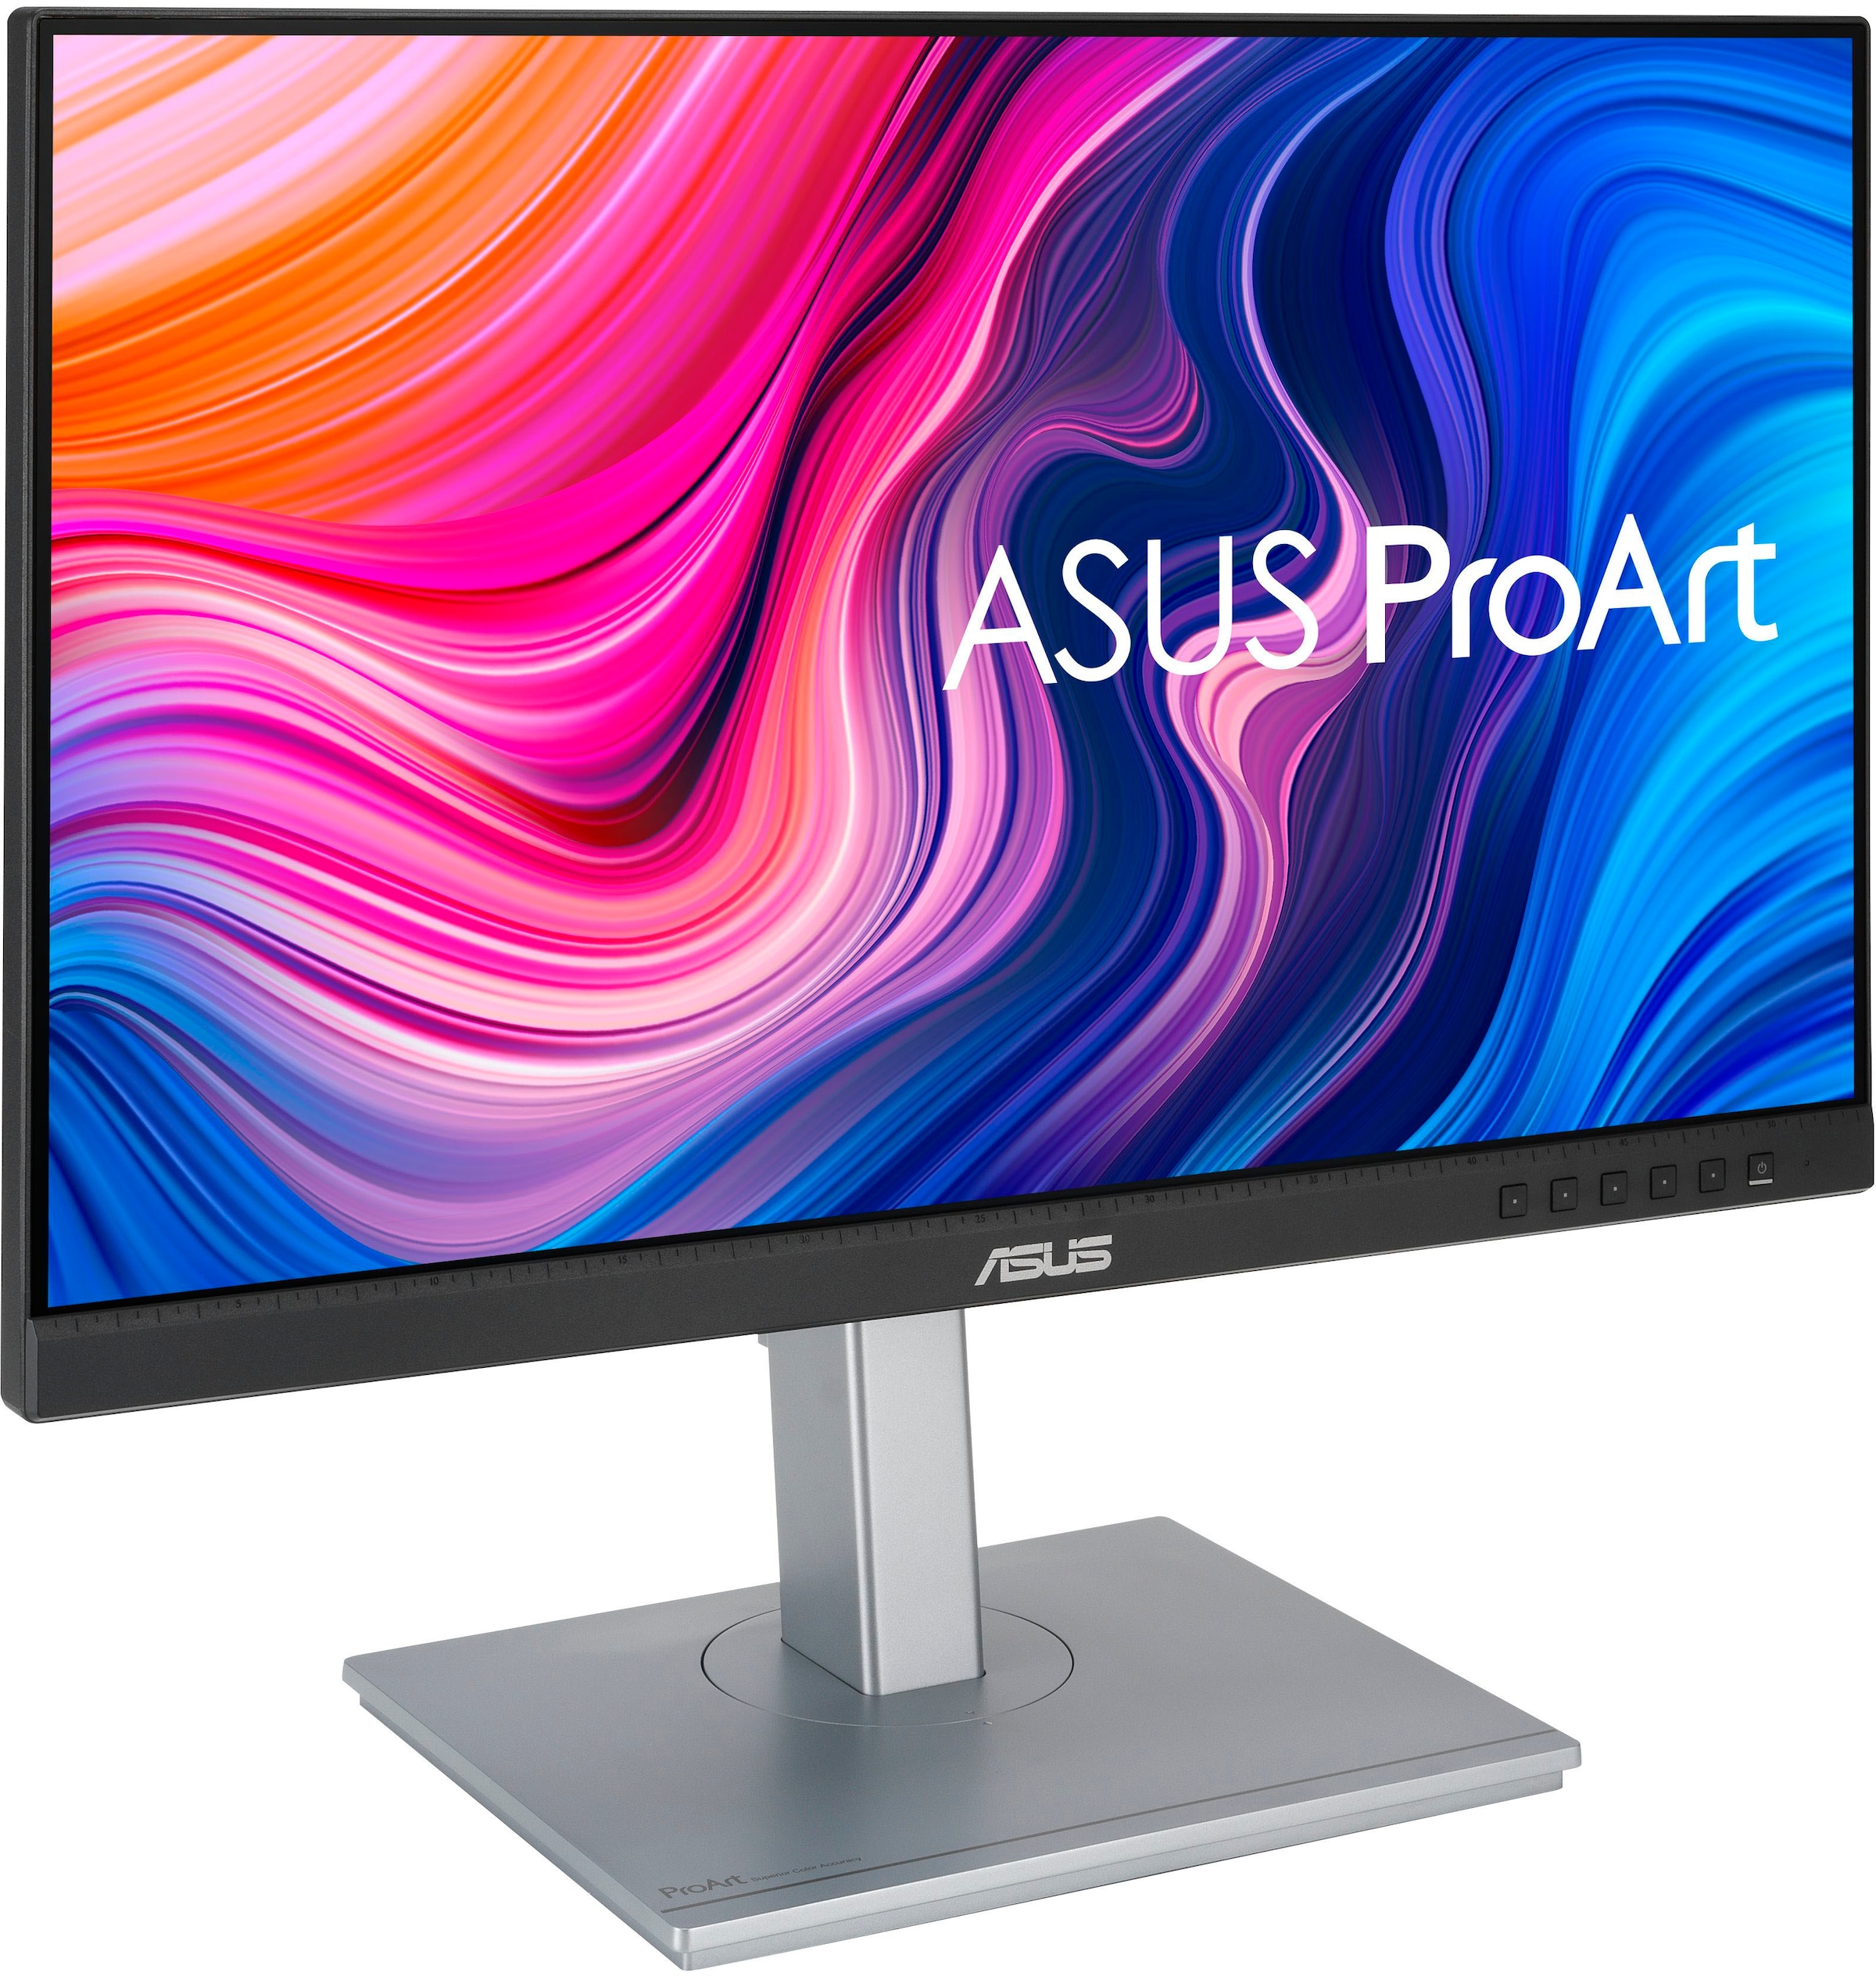 Asus LED-Monitor »PA247CV«, 60,5 cm/23,8 Zoll, 1920 x 1080 px, Full HD, 5 ms Reaktionszeit, 75 Hz